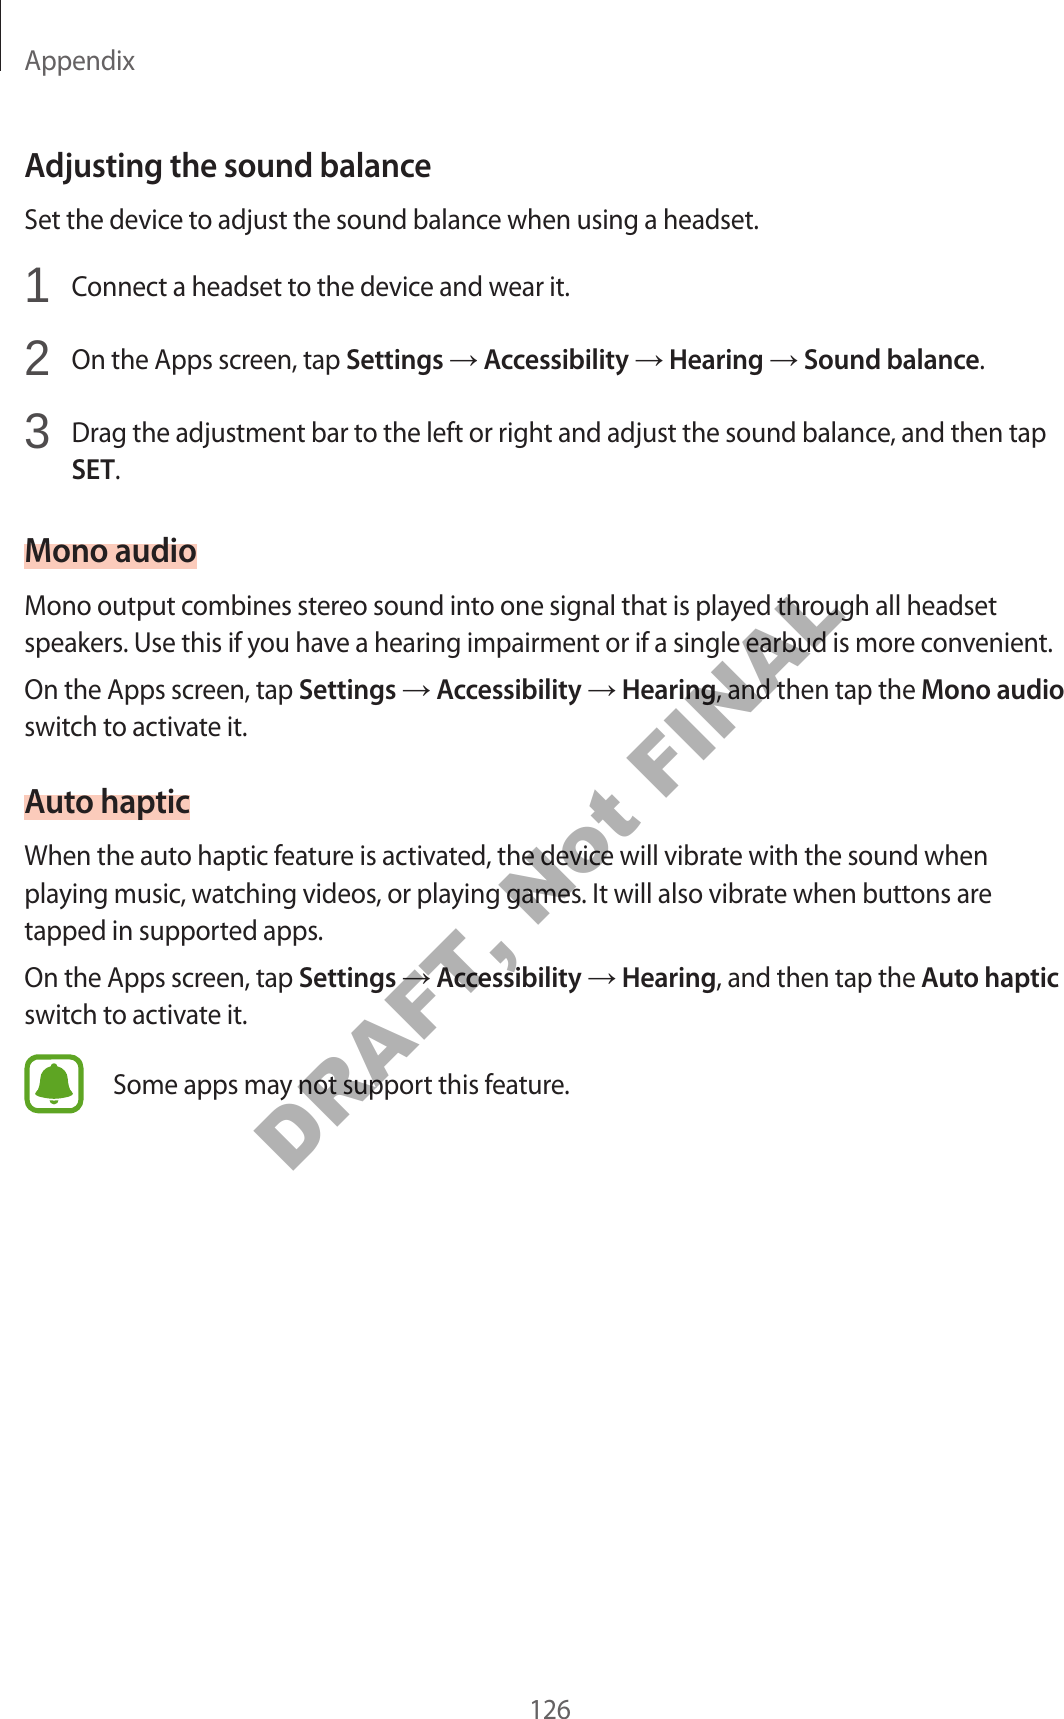 Appendix126Adjusting the sound balanceSet the device to adjust the sound balance when using a headset.1  Connect a headset to the device and wear it.2  On the Apps screen, tap Settings  Accessibility  Hearing  Sound balance.3  Drag the adjustment bar to the left or right and adjust the sound balance, and then tap SET.Mono audioMono output combines stereo sound into one signal that is played through all headset speakers. Use this if you have a hearing impairment or if a single earbud is more convenient.On the Apps screen, tap Settings  Accessibility  Hearing, and then tap the Mono audio switch to activate it.Auto hapticWhen the auto haptic feature is activated, the device will vibrate with the sound when playing music, watching videos, or playing games. It will also vibrate when buttons are tapped in supported apps.On the Apps screen, tap Settings  Accessibility  Hearing, and then tap the Auto haptic switch to activate it.Some apps may not support this feature.DRAFT, Not FINAL